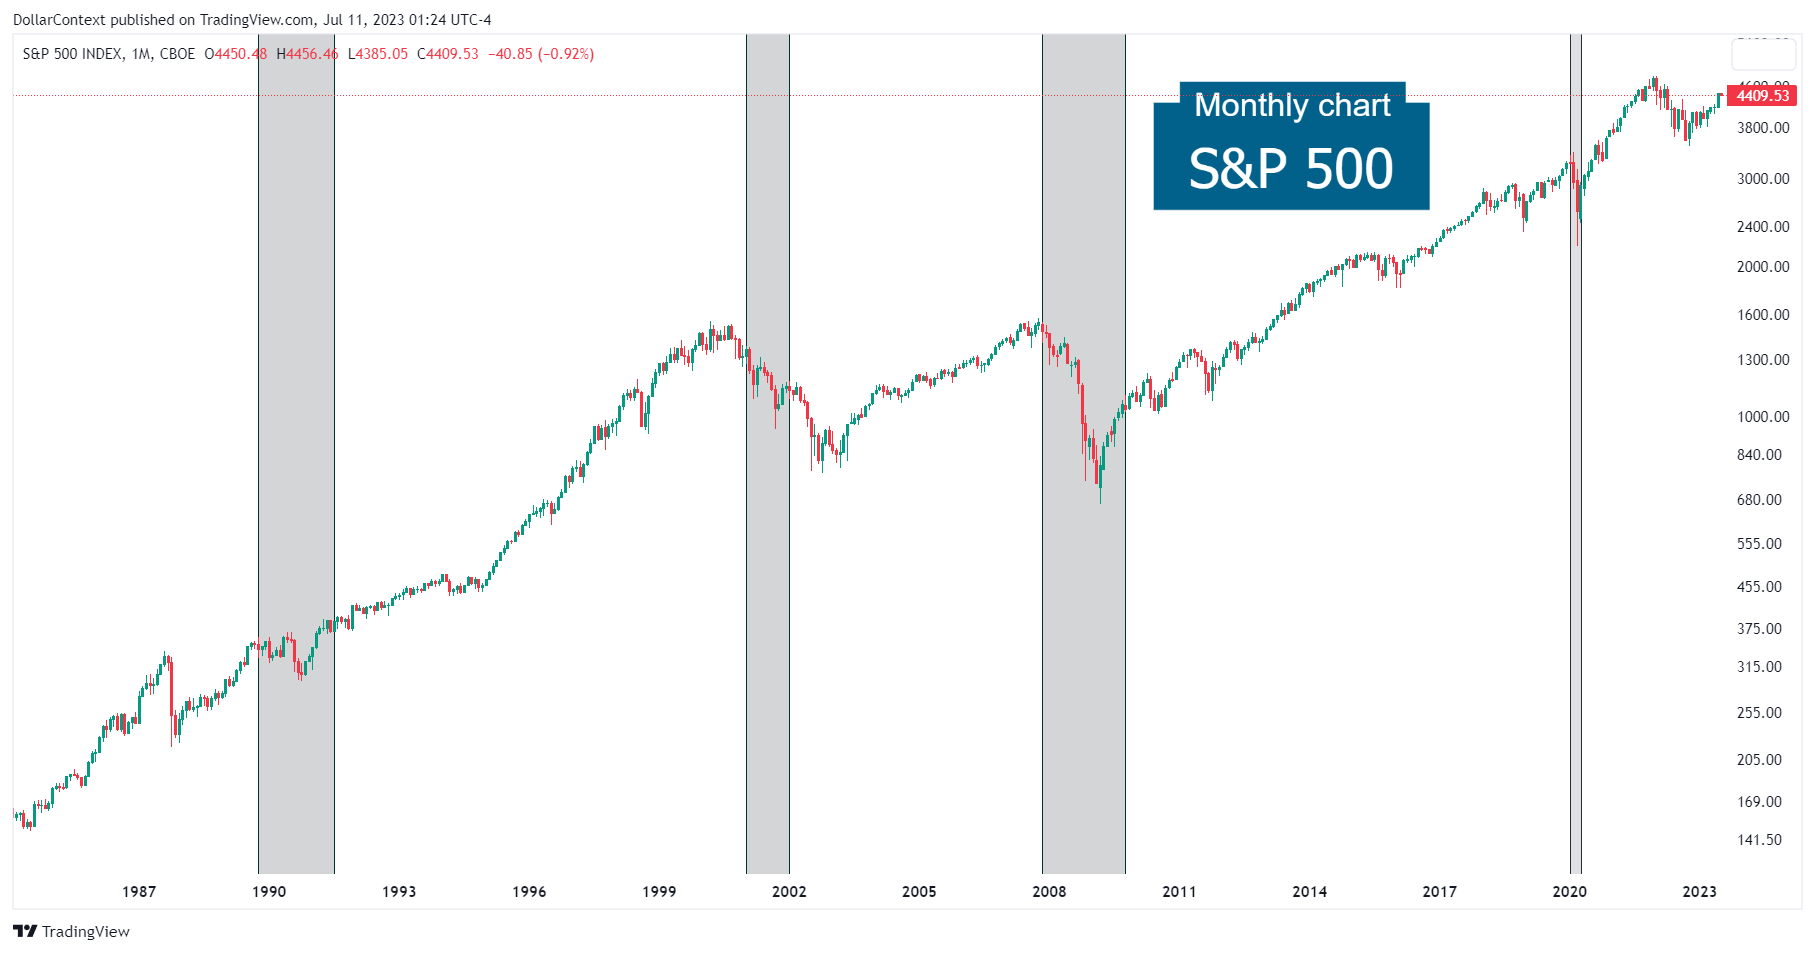 Behavior of the S&P 500 in Recession Periods (Weekly Chart)